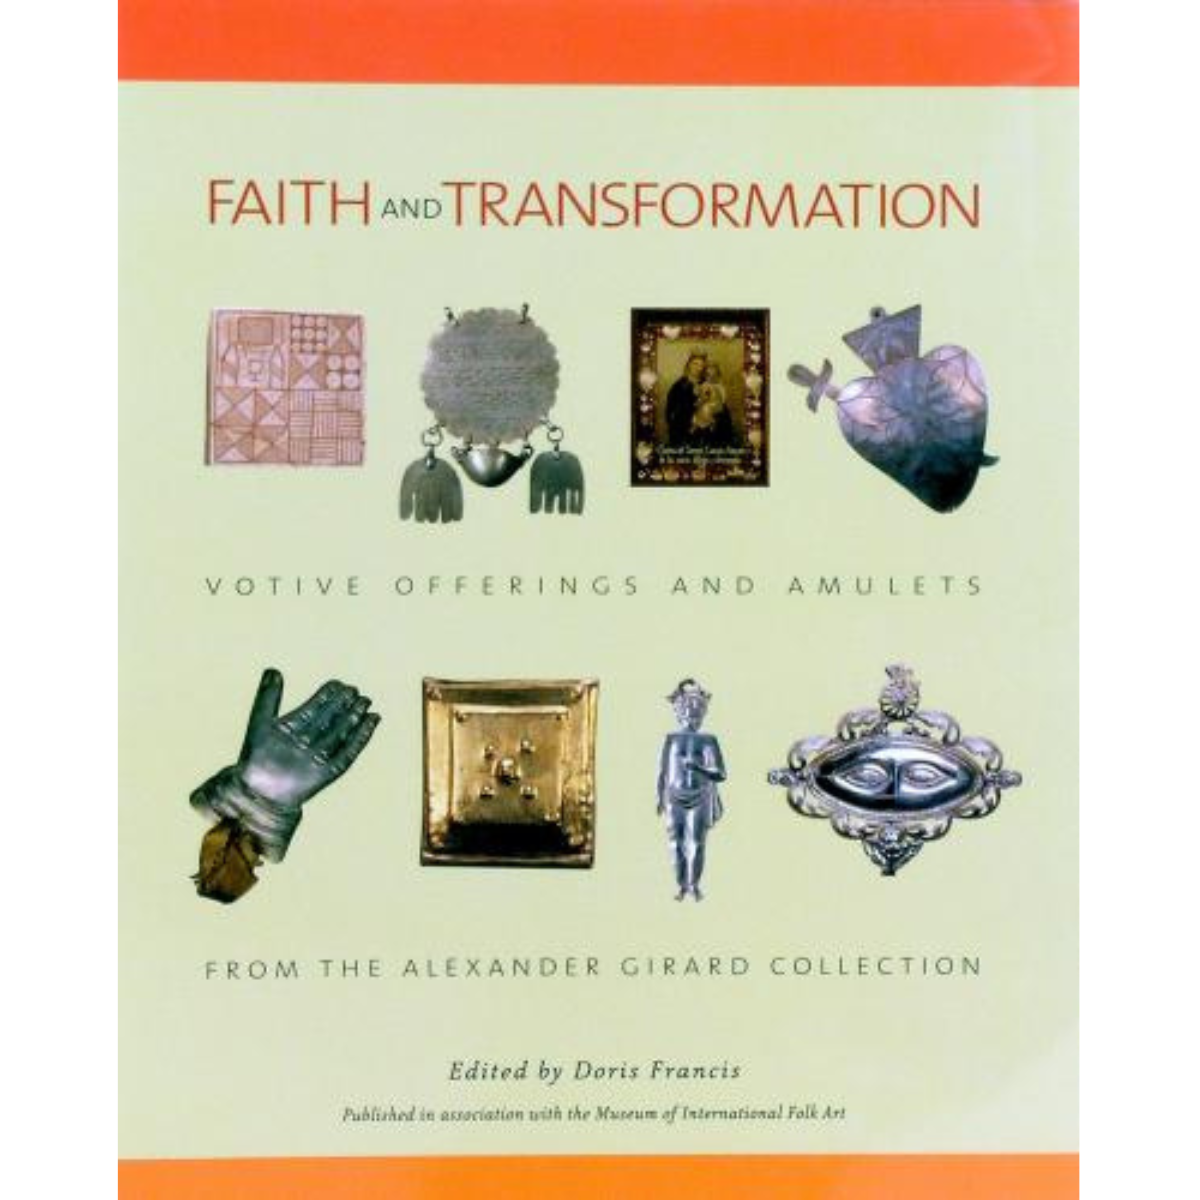 Faith and Transformation: Votive Offerings and Amulets from the Alexander Girard Collection